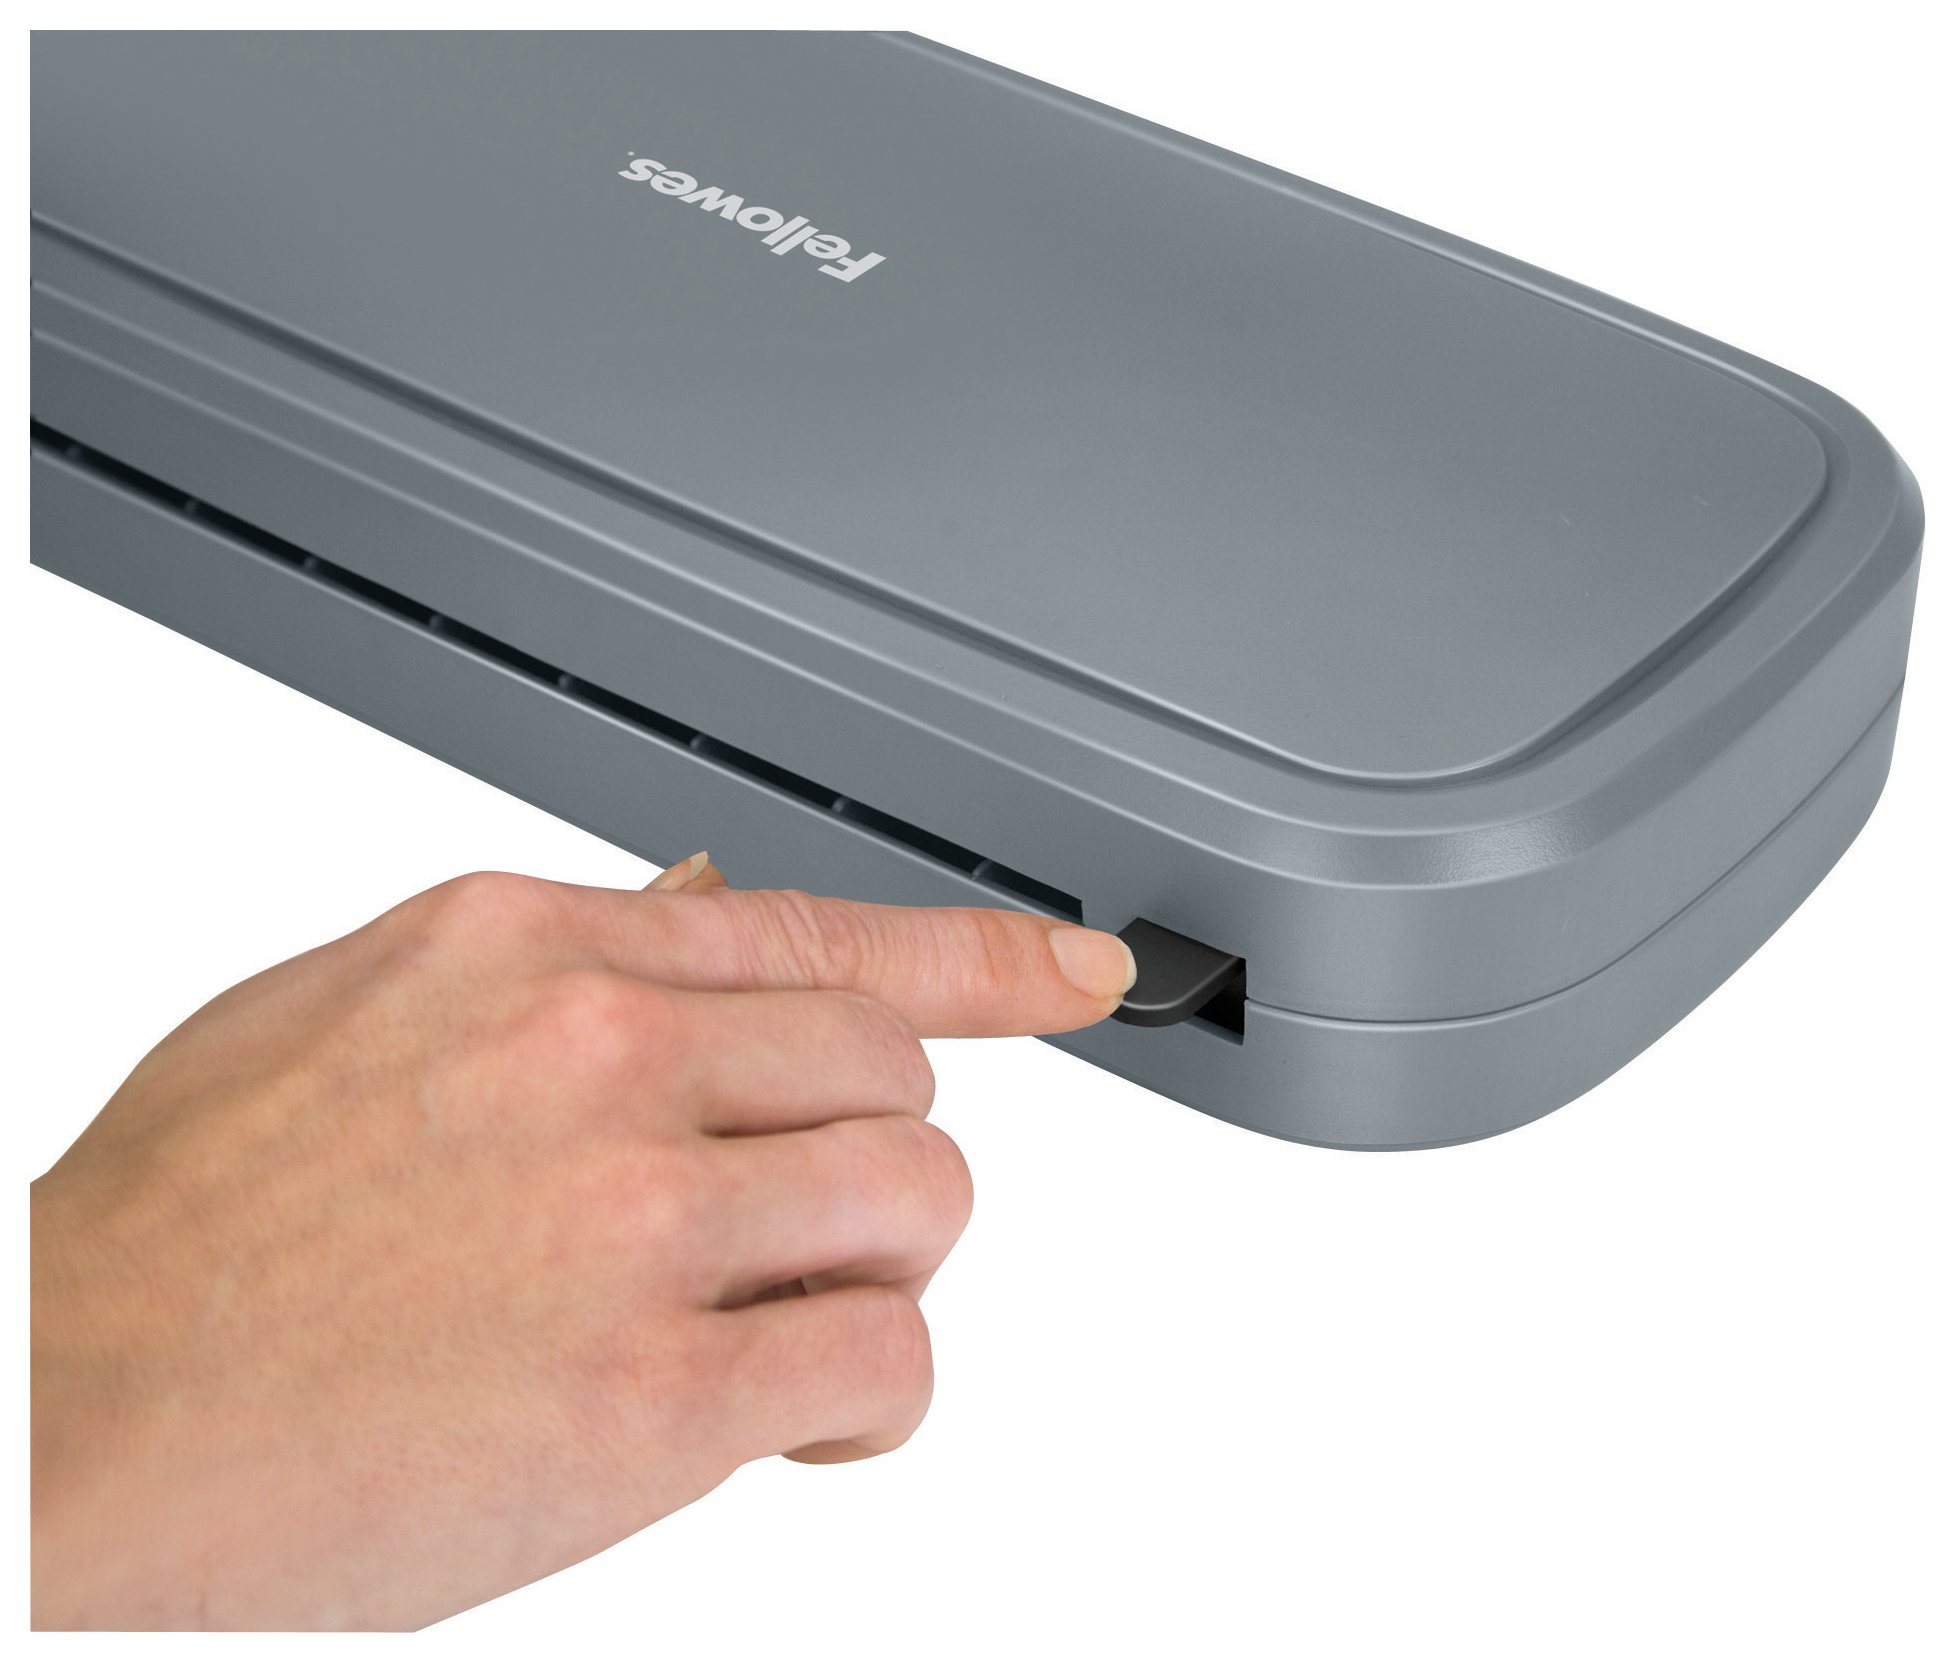 Fellowes A75 A4 Laminator Review